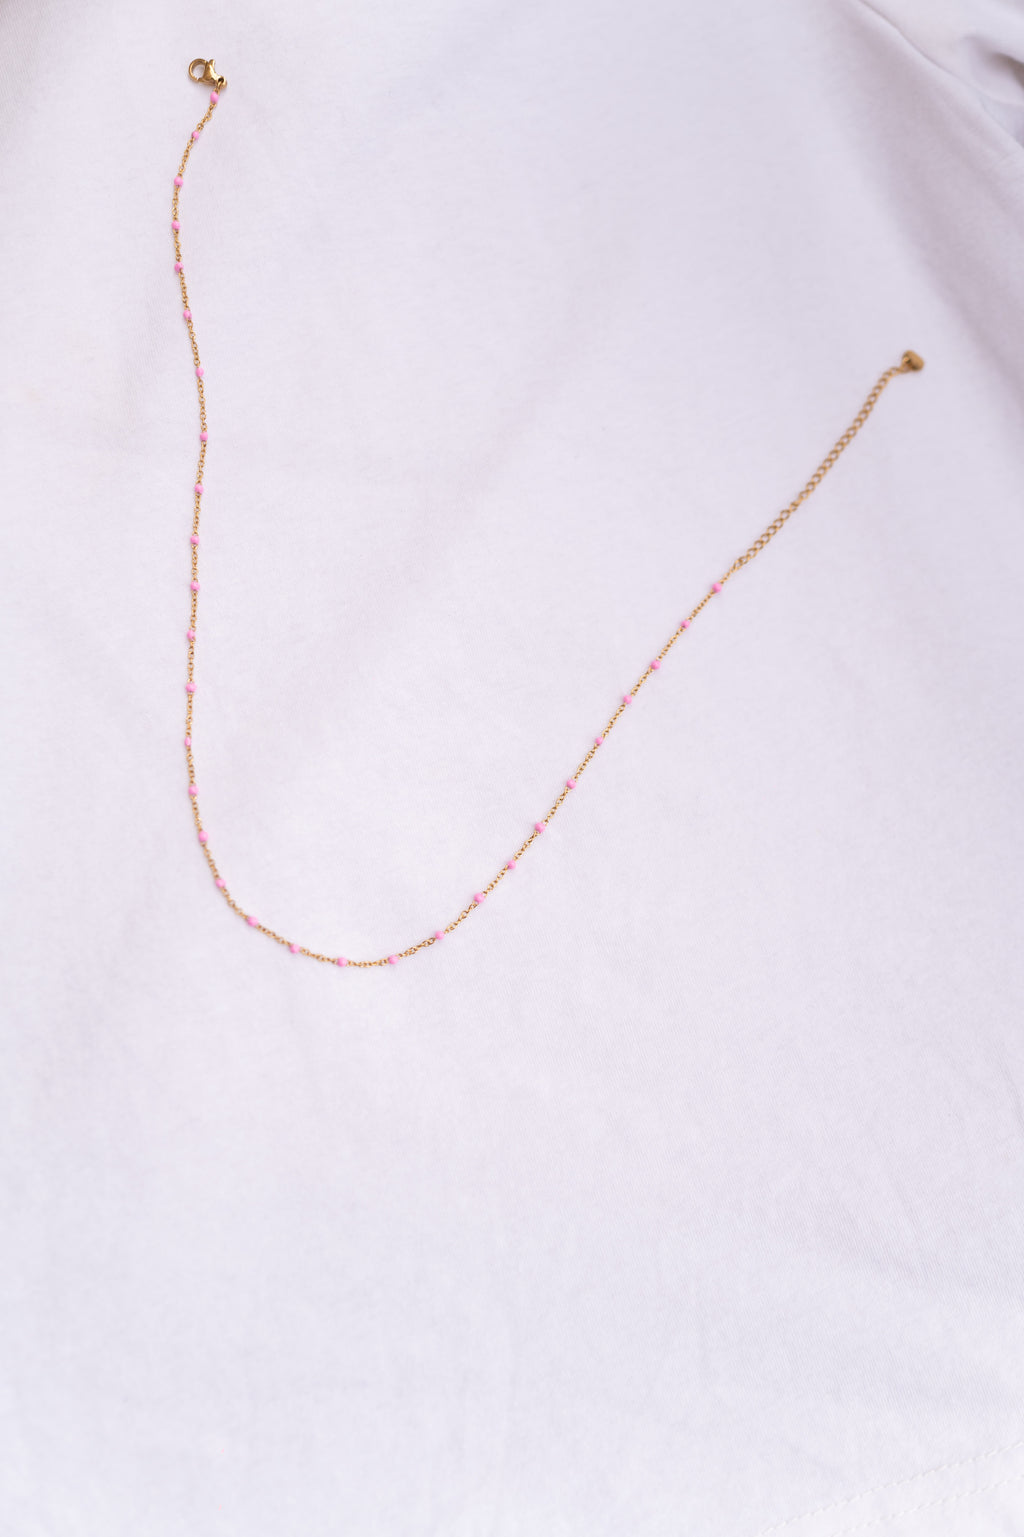 Mary necklace - pink